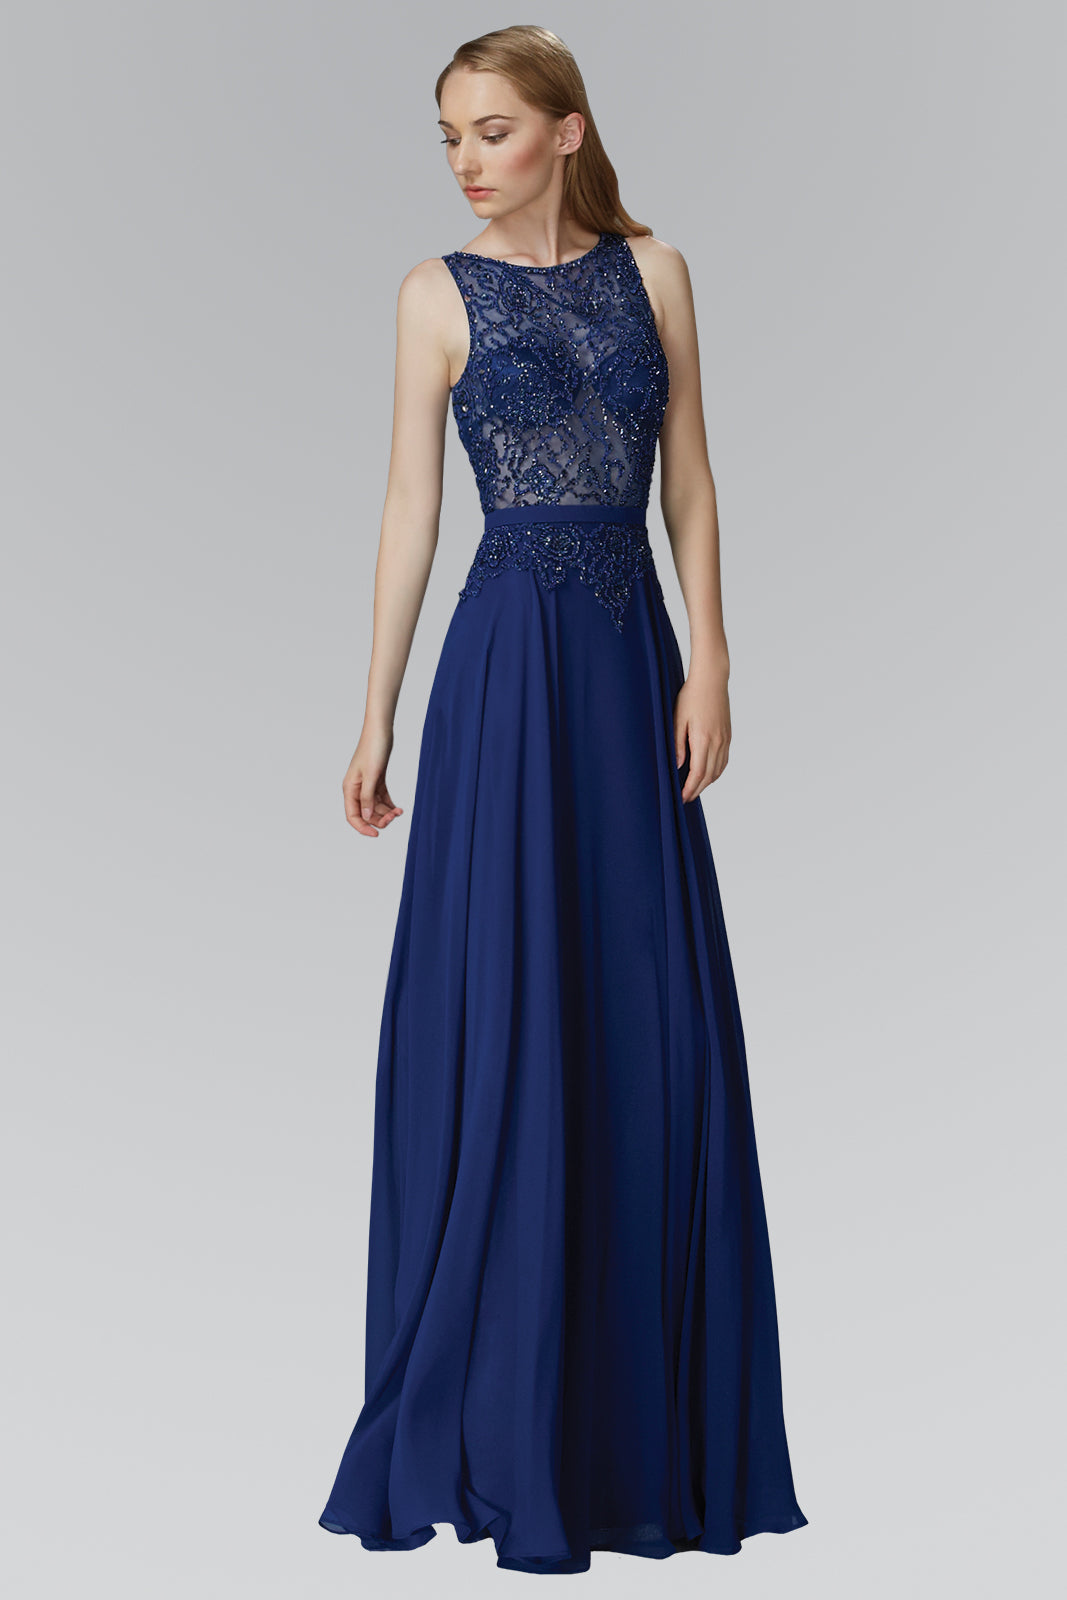 Floor Length Chiffon Long Dress with Bead Embellished Sheer Bodice GLGL2103 Elsy Style PROM